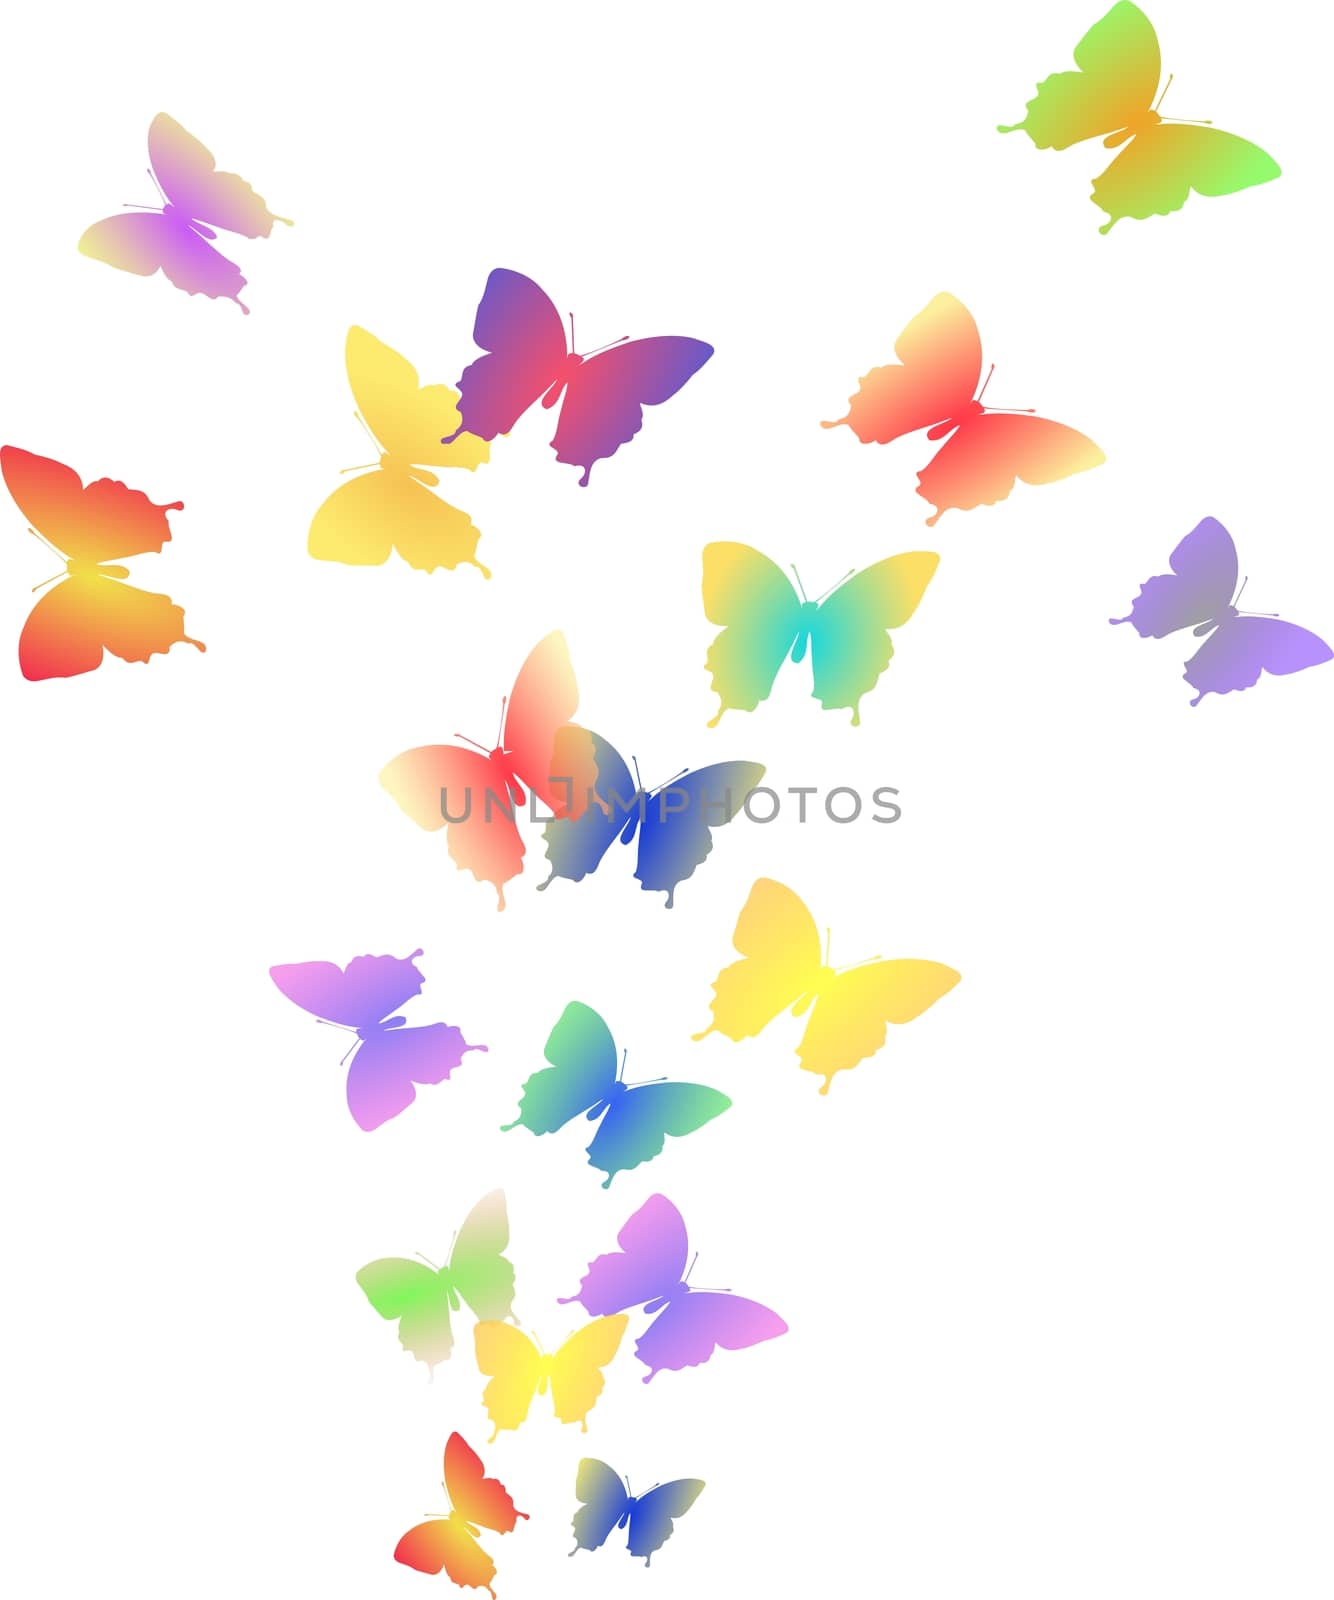 Illustration of flight of colorful butterflies by sylwia